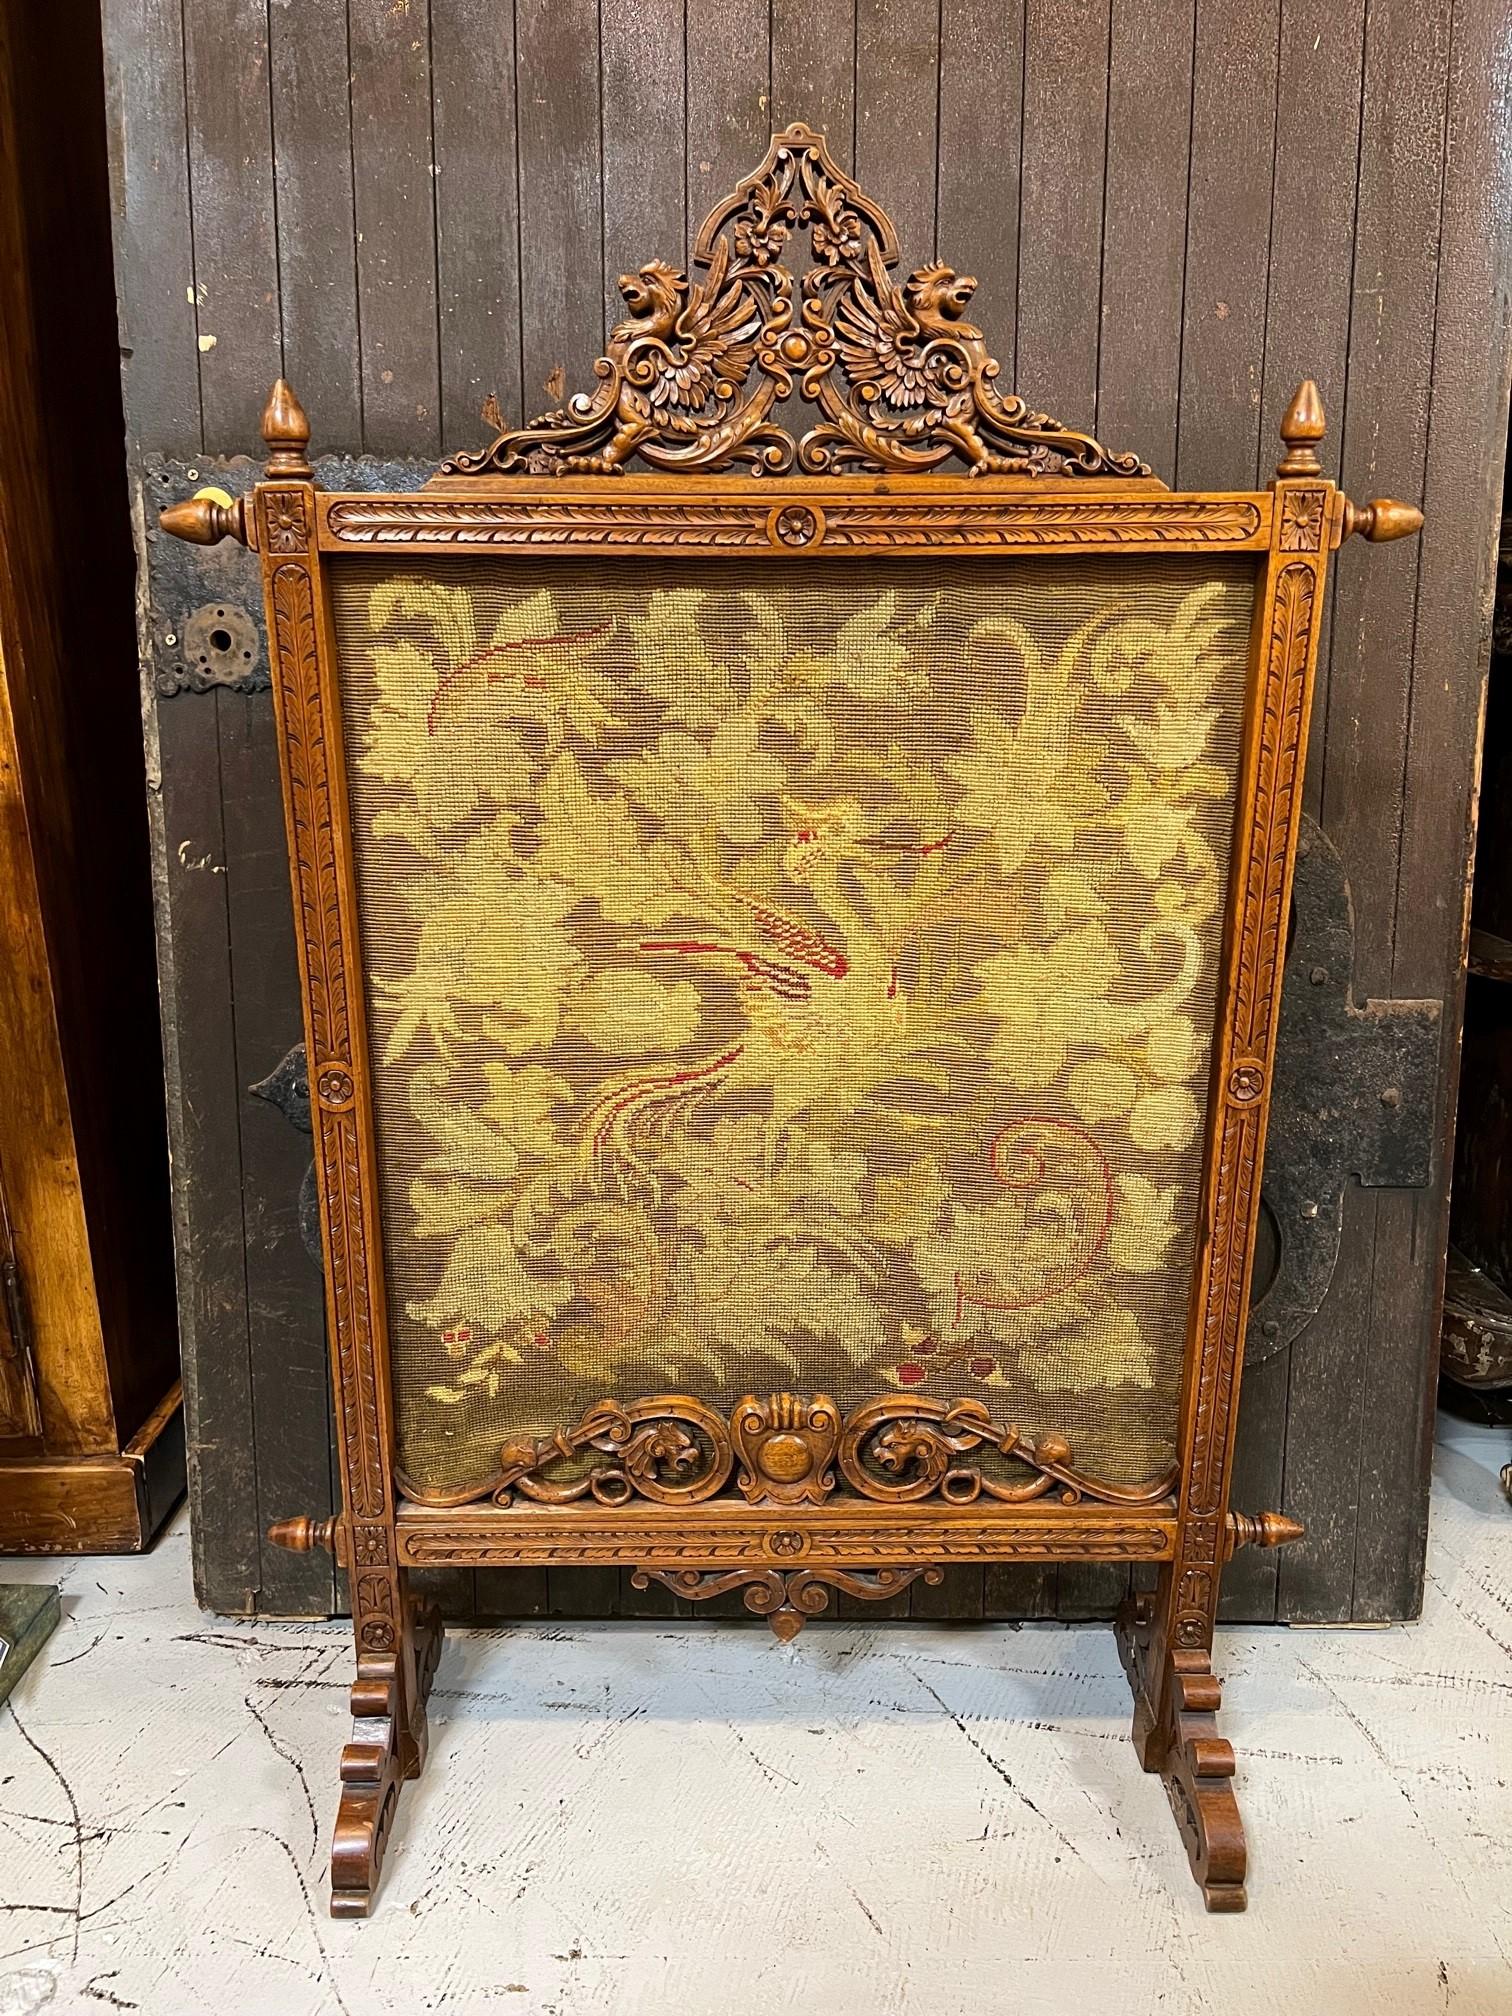 Beautiful late 19th century carved wood fire screen with a center crest of winged griffons and the original needlepoint tapestry center. The carved wood frame is made of walnut and is supported by scroll carved wooden feet which are very sturdy. The